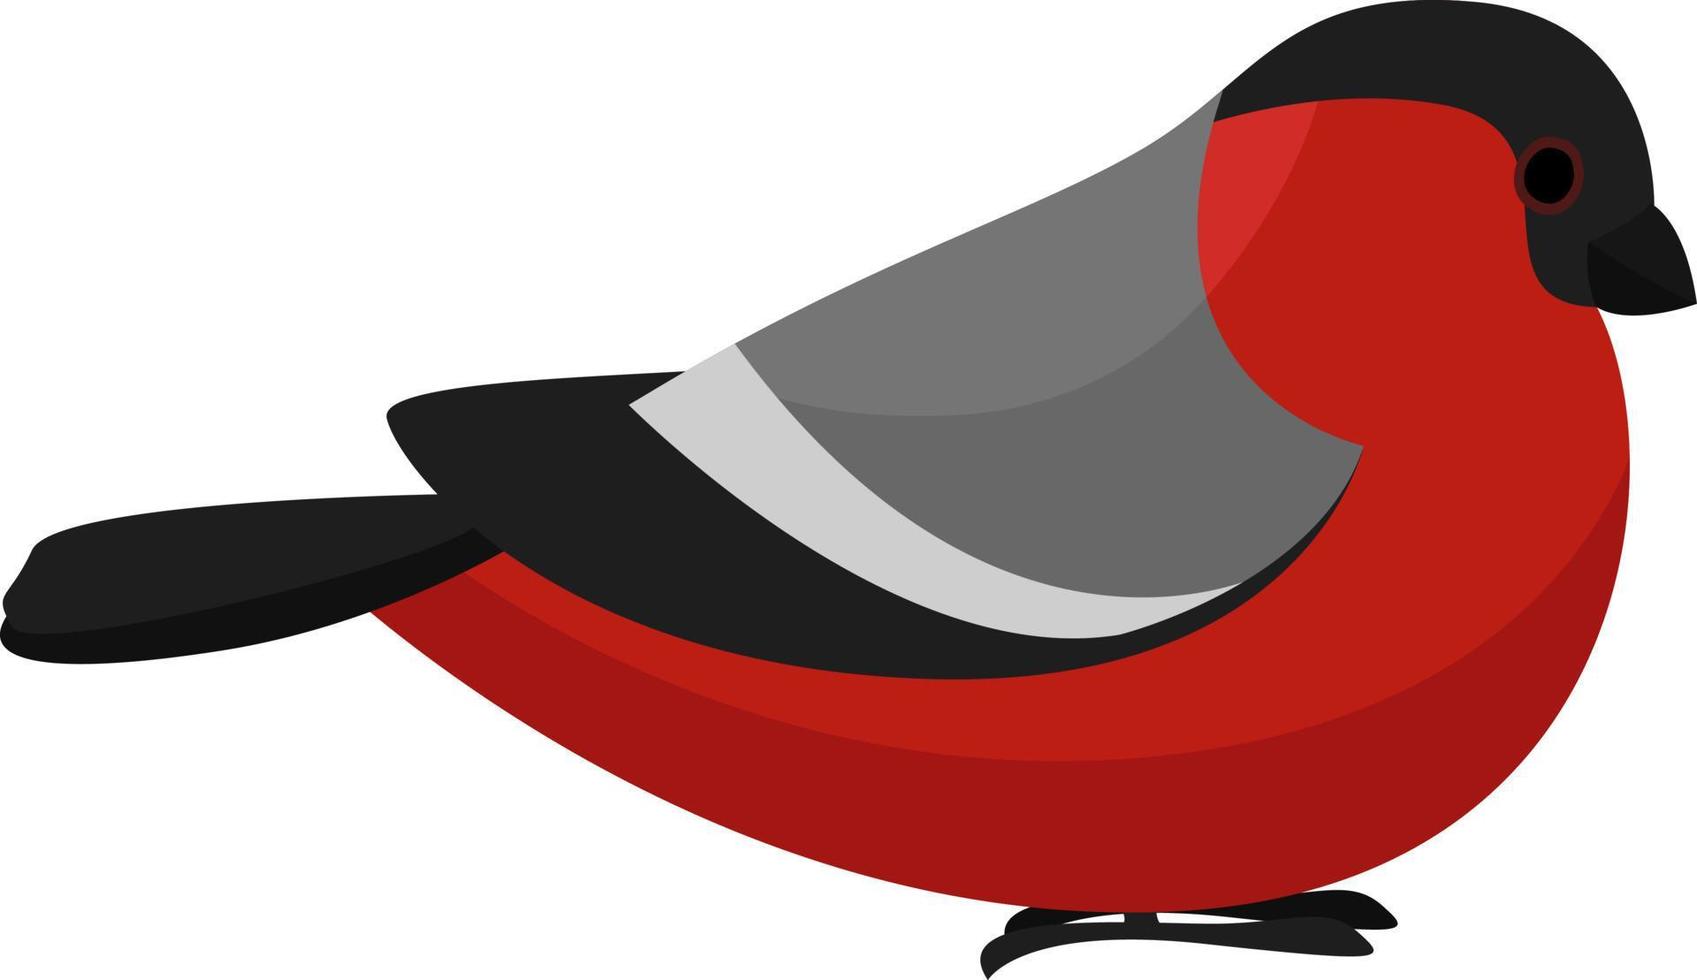 Red small bird, illustration, vector on white background